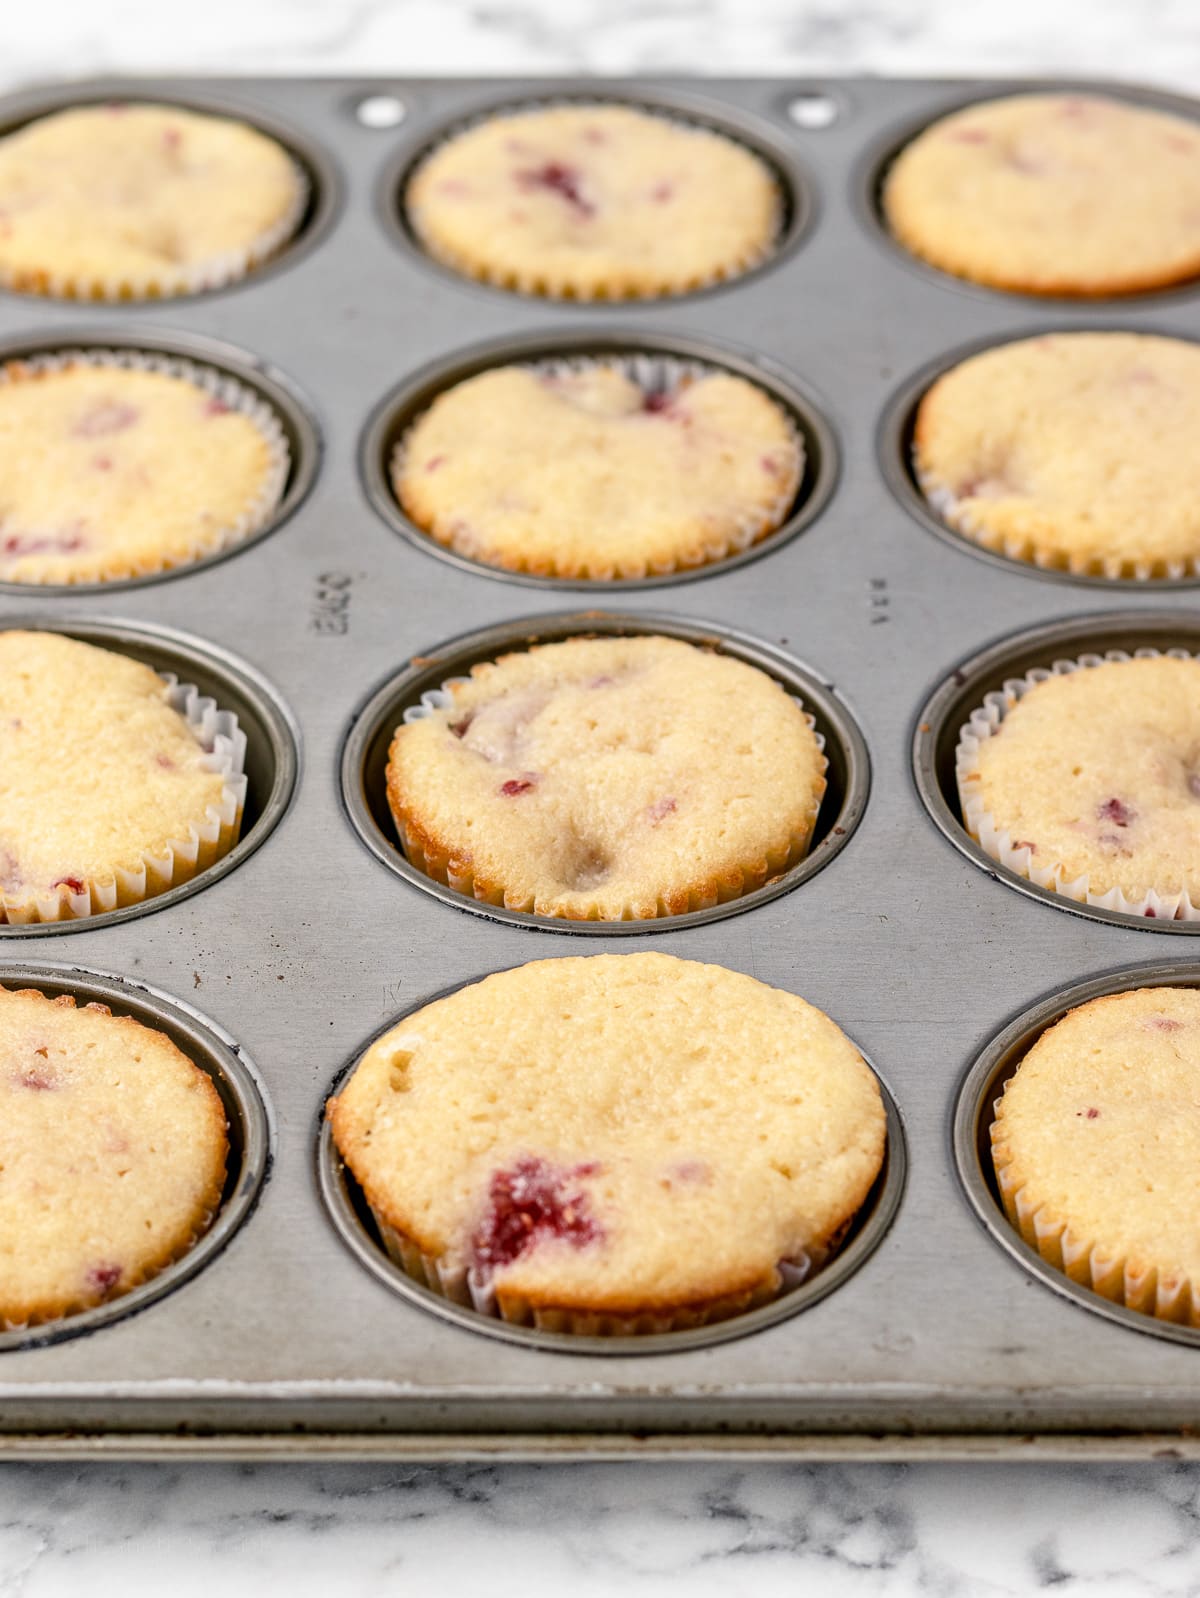 Baked cupcakes in cupcake baking pan, right out of the oven.